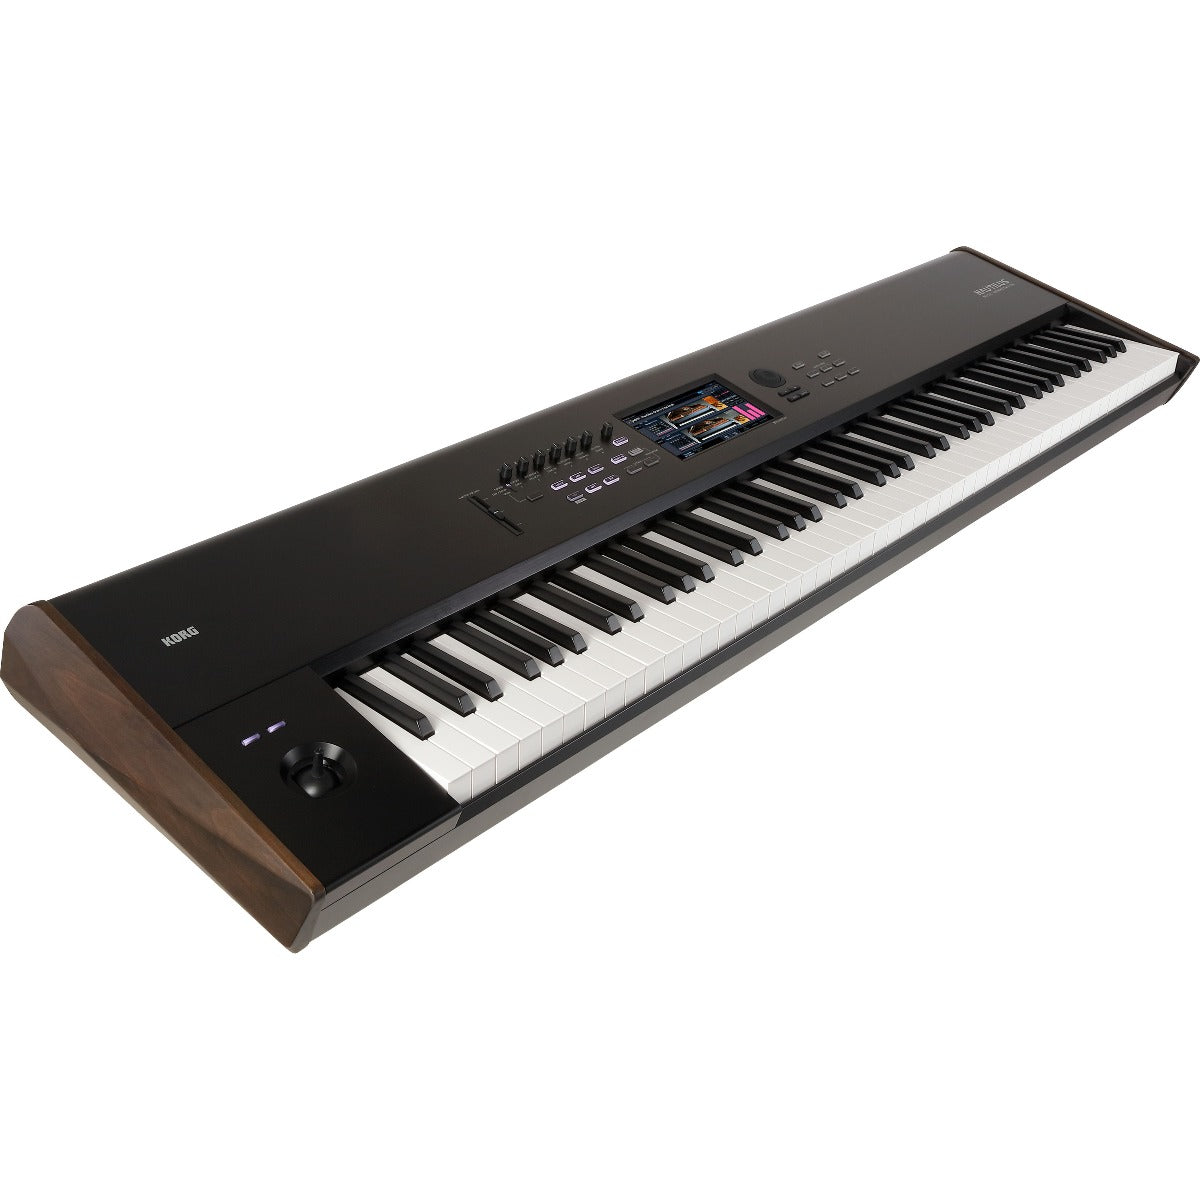 3/4 view of Korg Nautilus 88-Key Music Workstation showing top, front and left side